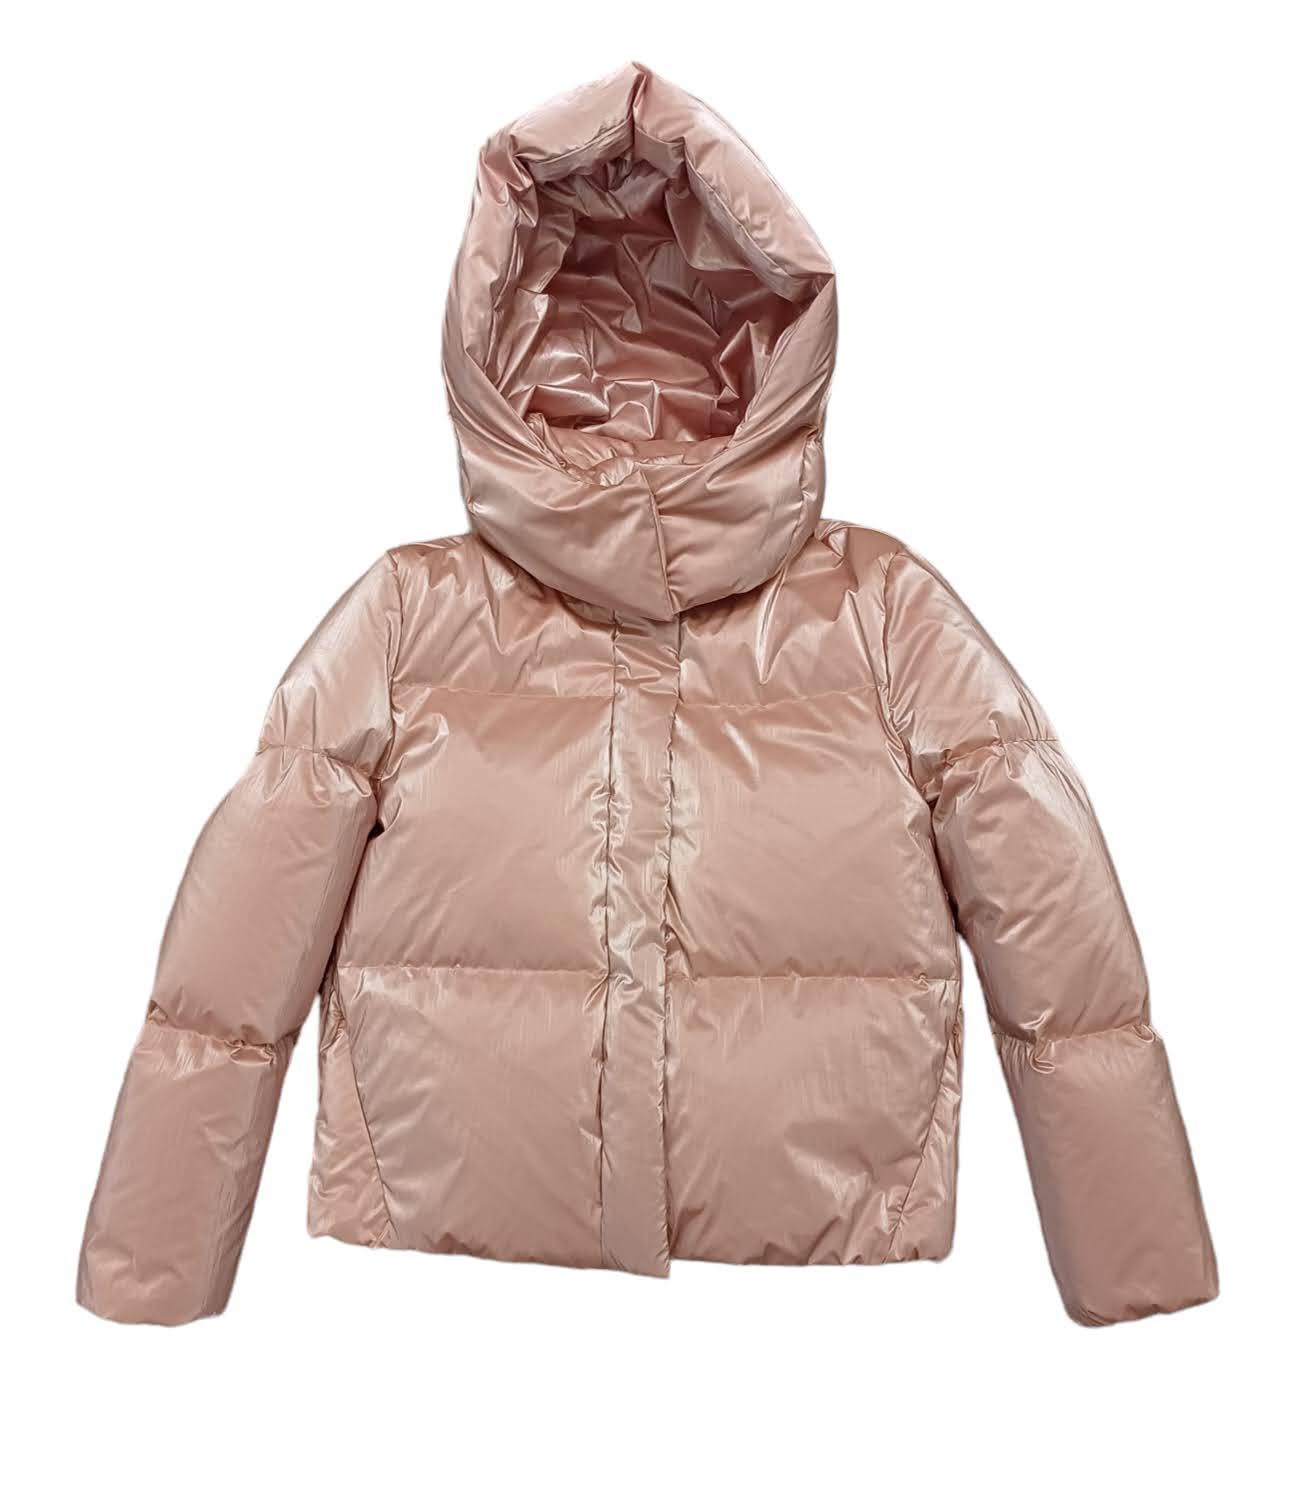 ELSY Girl Short Jacket Pink Phard real feather